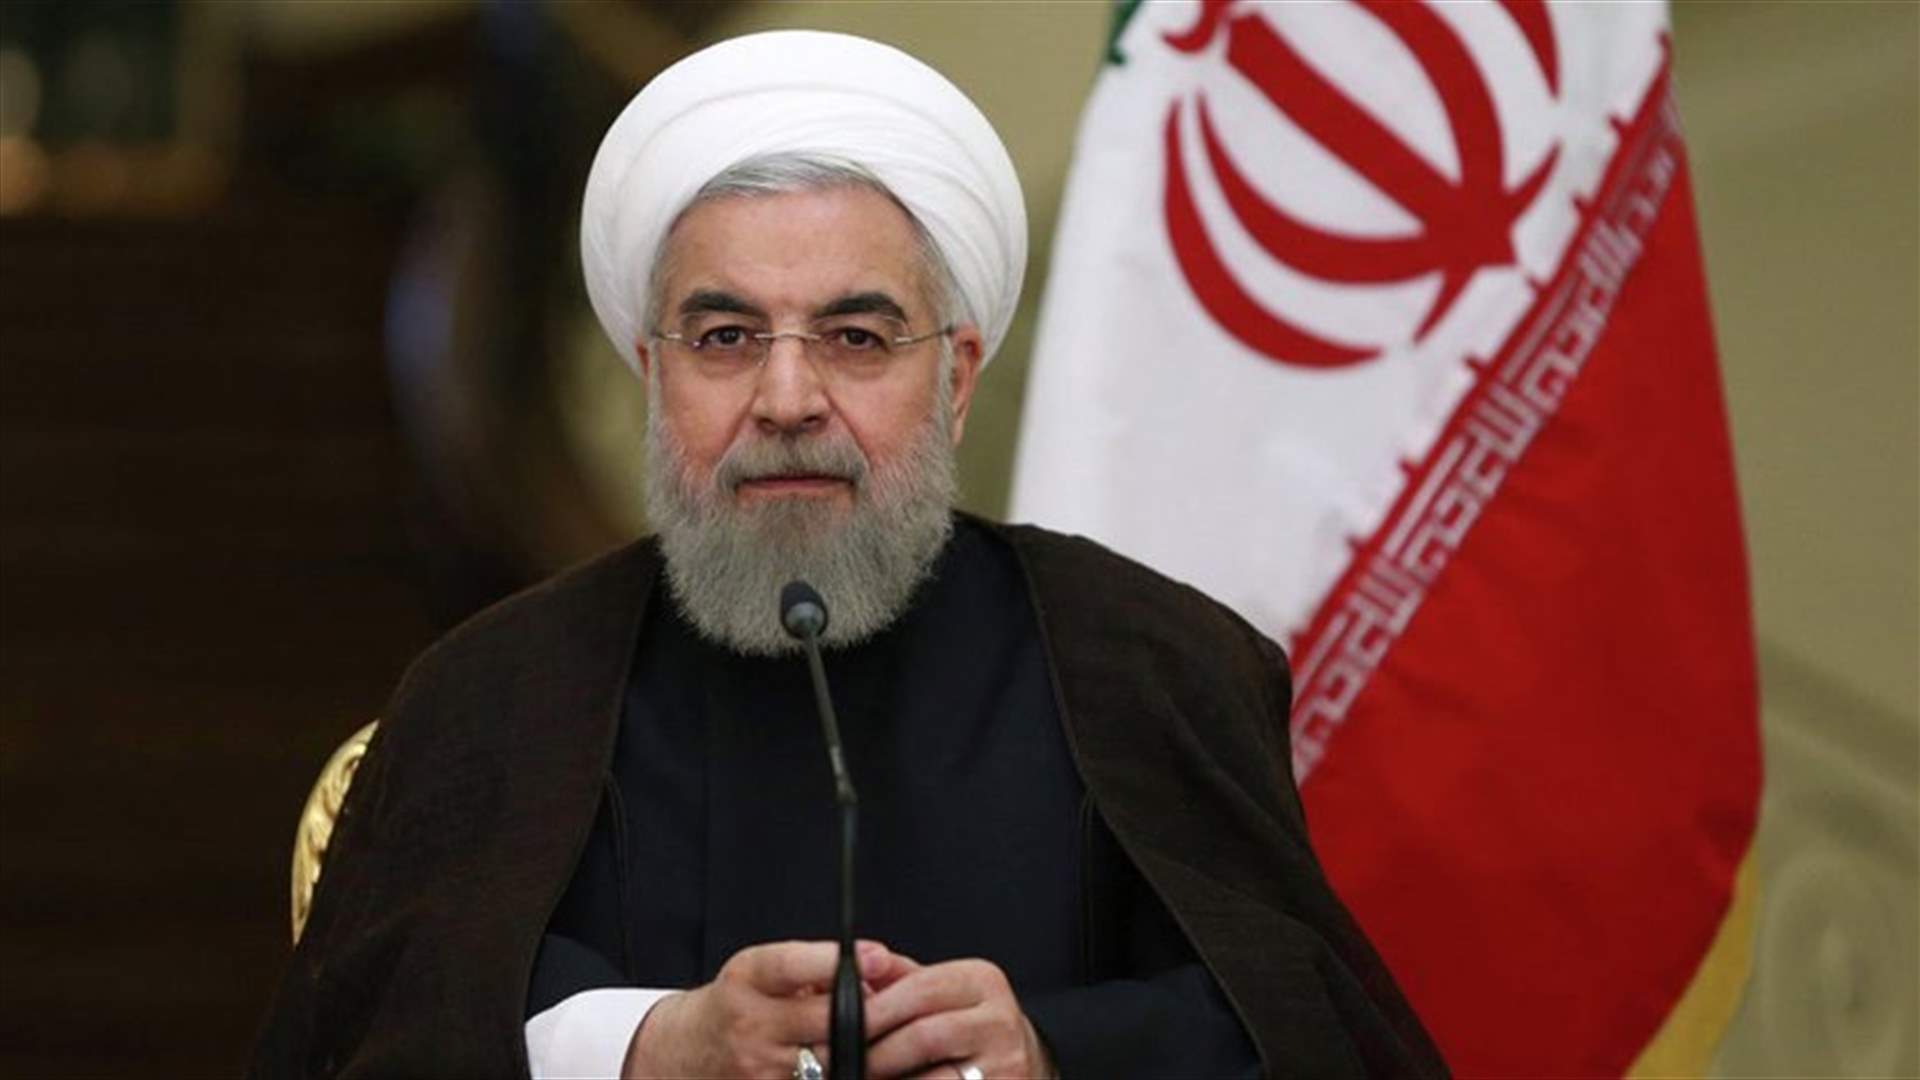 Rouhani says Iran ready to improve ties with all regional states